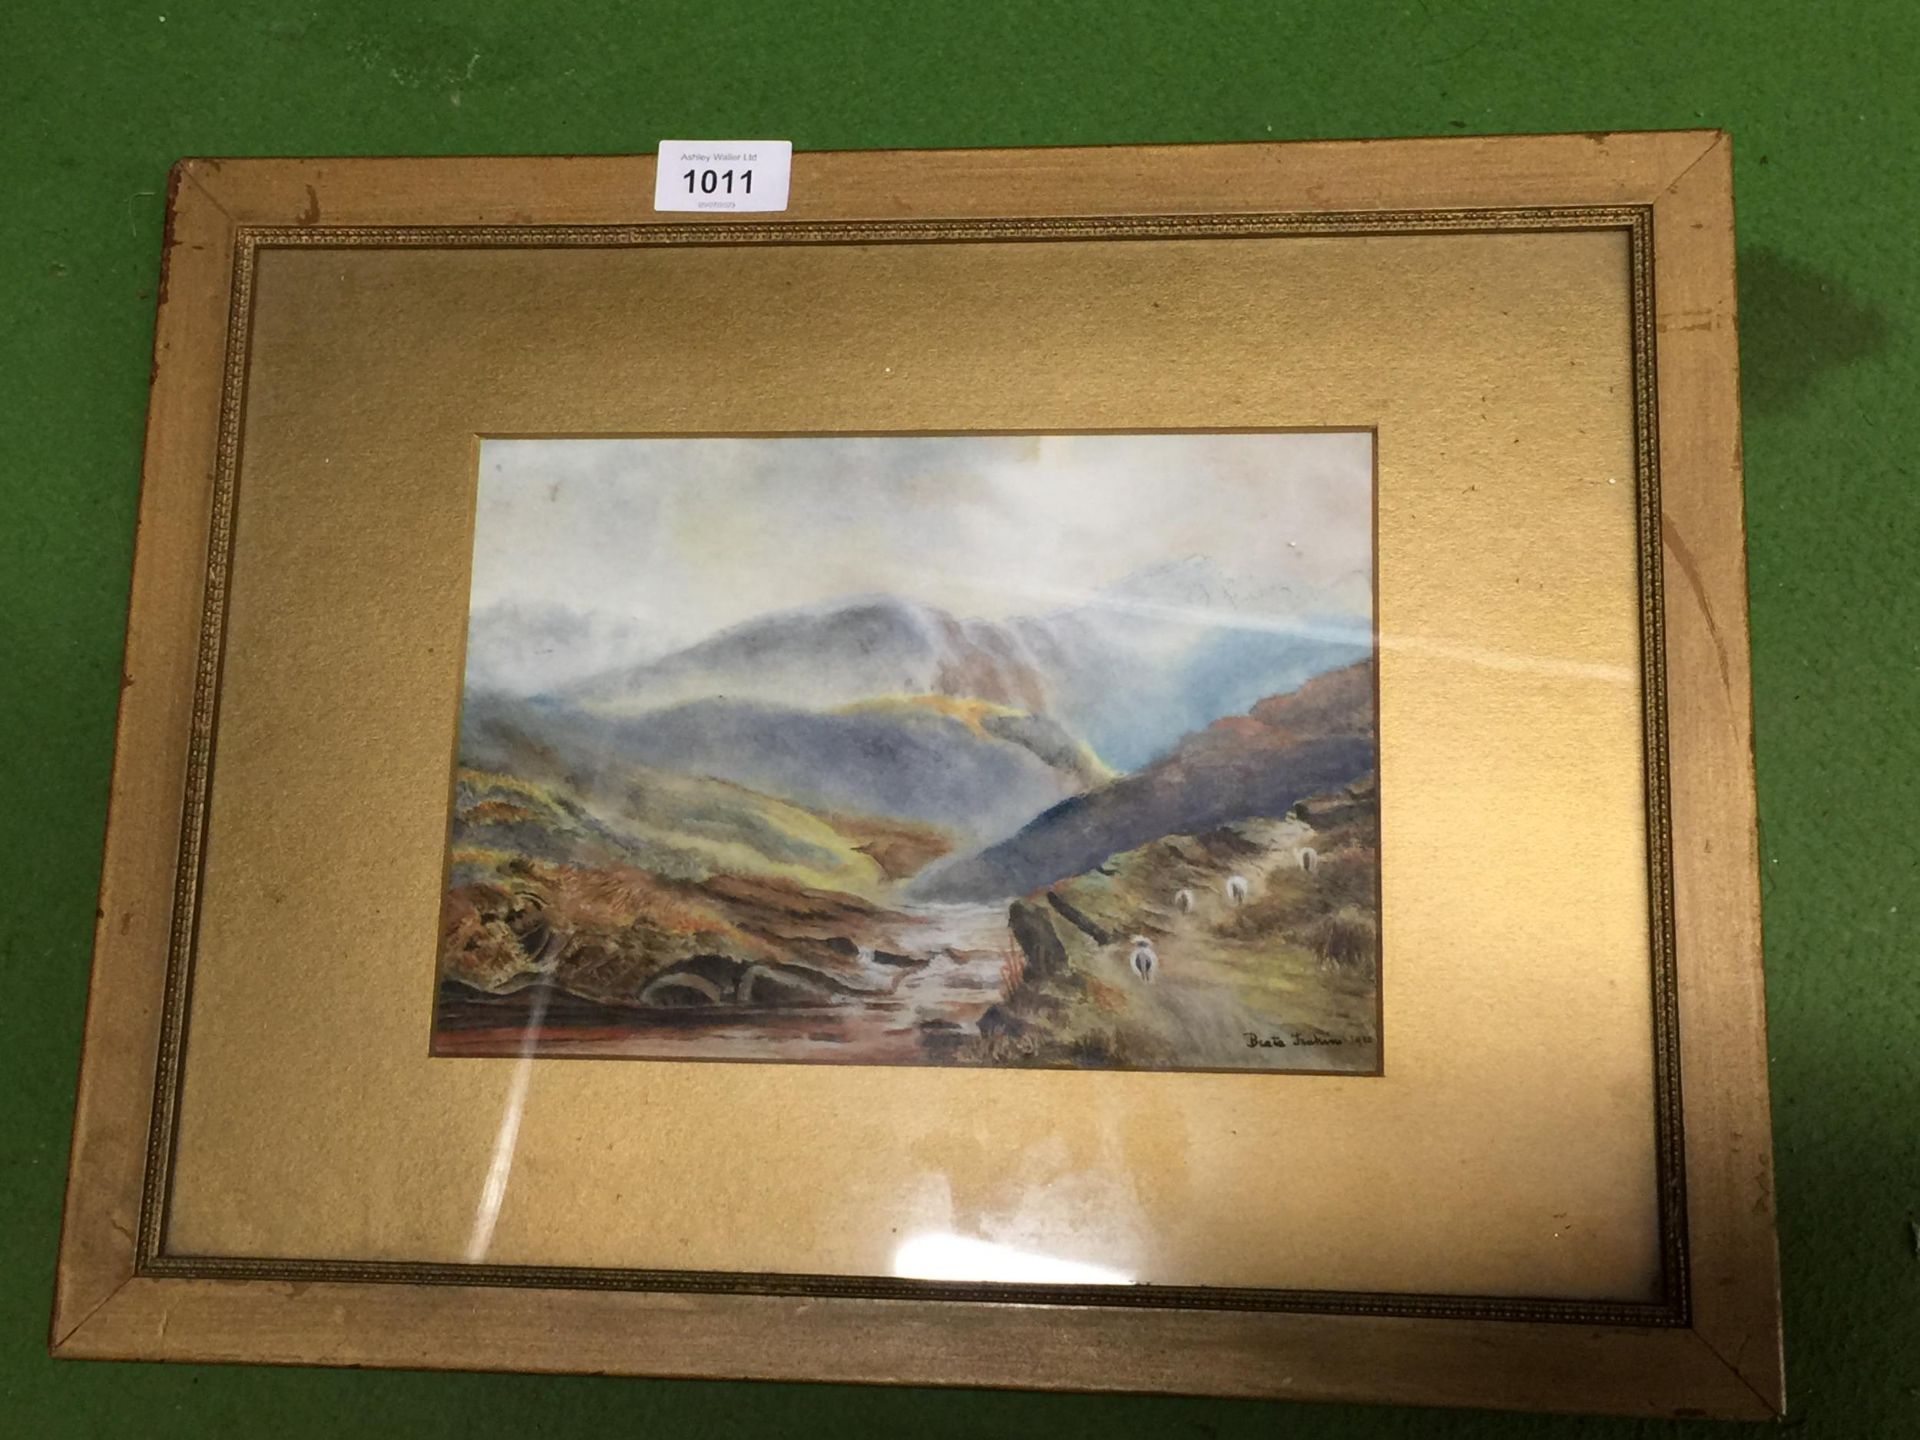 A QUANLITY FRAMED WATERCOLOUR 'SHEEP IN THE HILLS' SIGNED B JENKINS 1910